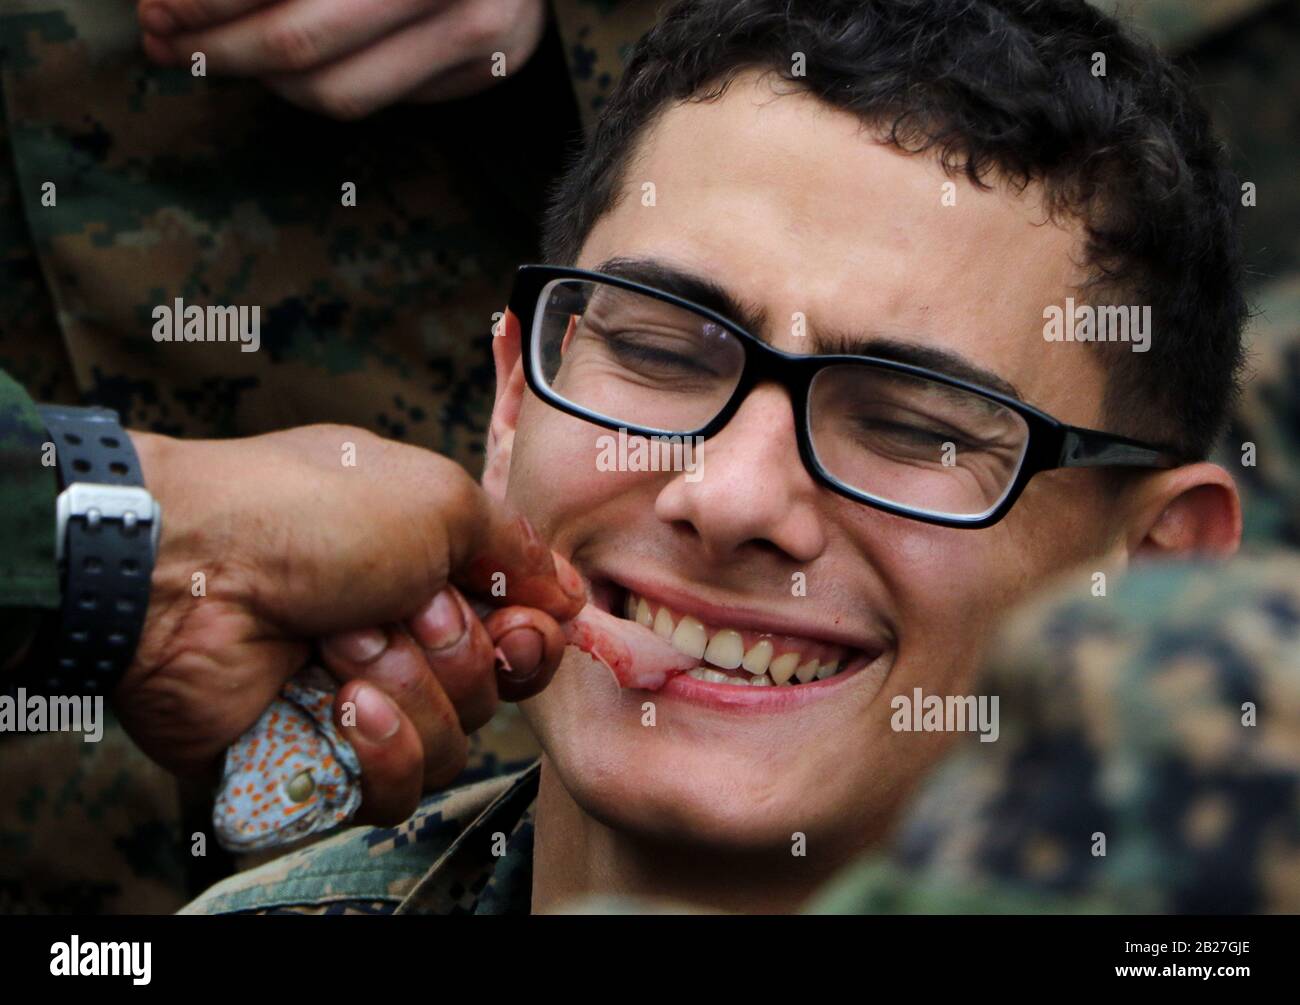 Chanthaburi, Thailand. 1st Mar, 2020. US Marines eats a gecko during a jungle survival training as part of the military exercise Cobra Gold 2020 at a Navy base in Chanthaburi province. March 01, 2020. The 39th annual Cobra Gold military exercise is an event held between the Thai and US armed forces every year. It's the largest Asia-Pacific military exercise held each year, and is among the largest multinational military exercises in which the US participates. Credit: Urdee Image/ZUMA Wire/Alamy Live News Stock Photo